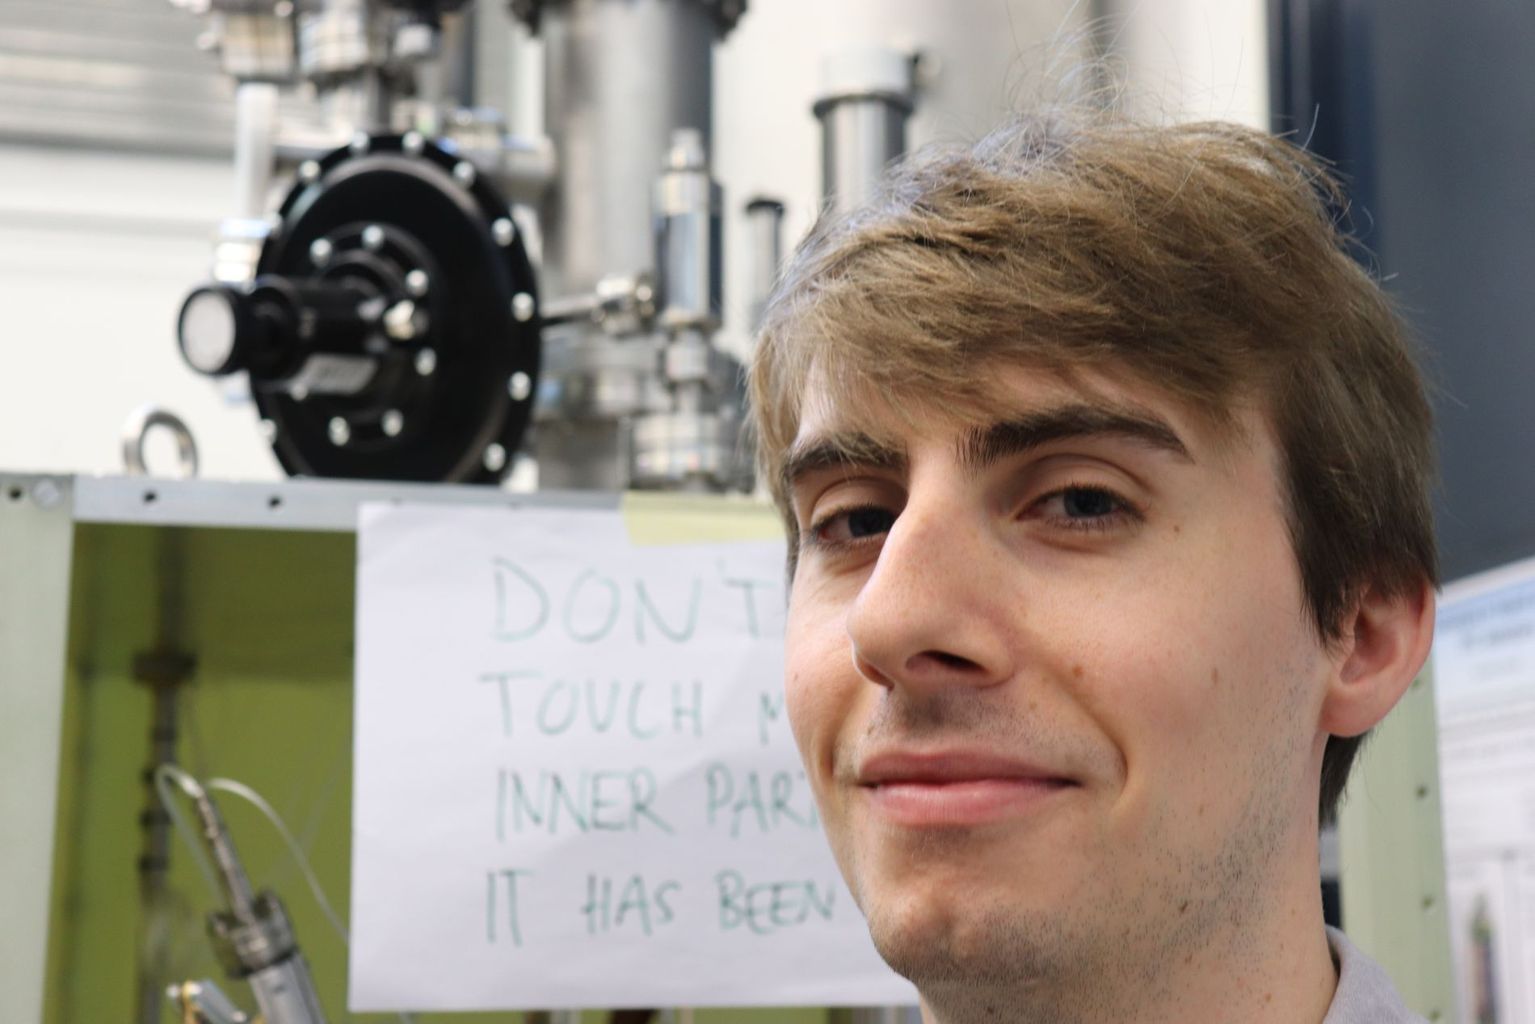 Dr. Callum Wilkinson (29) works in the research group of Prof. Antonio Ereditato at the University of Bern and prepares the DUNE expert for neutrinos research.